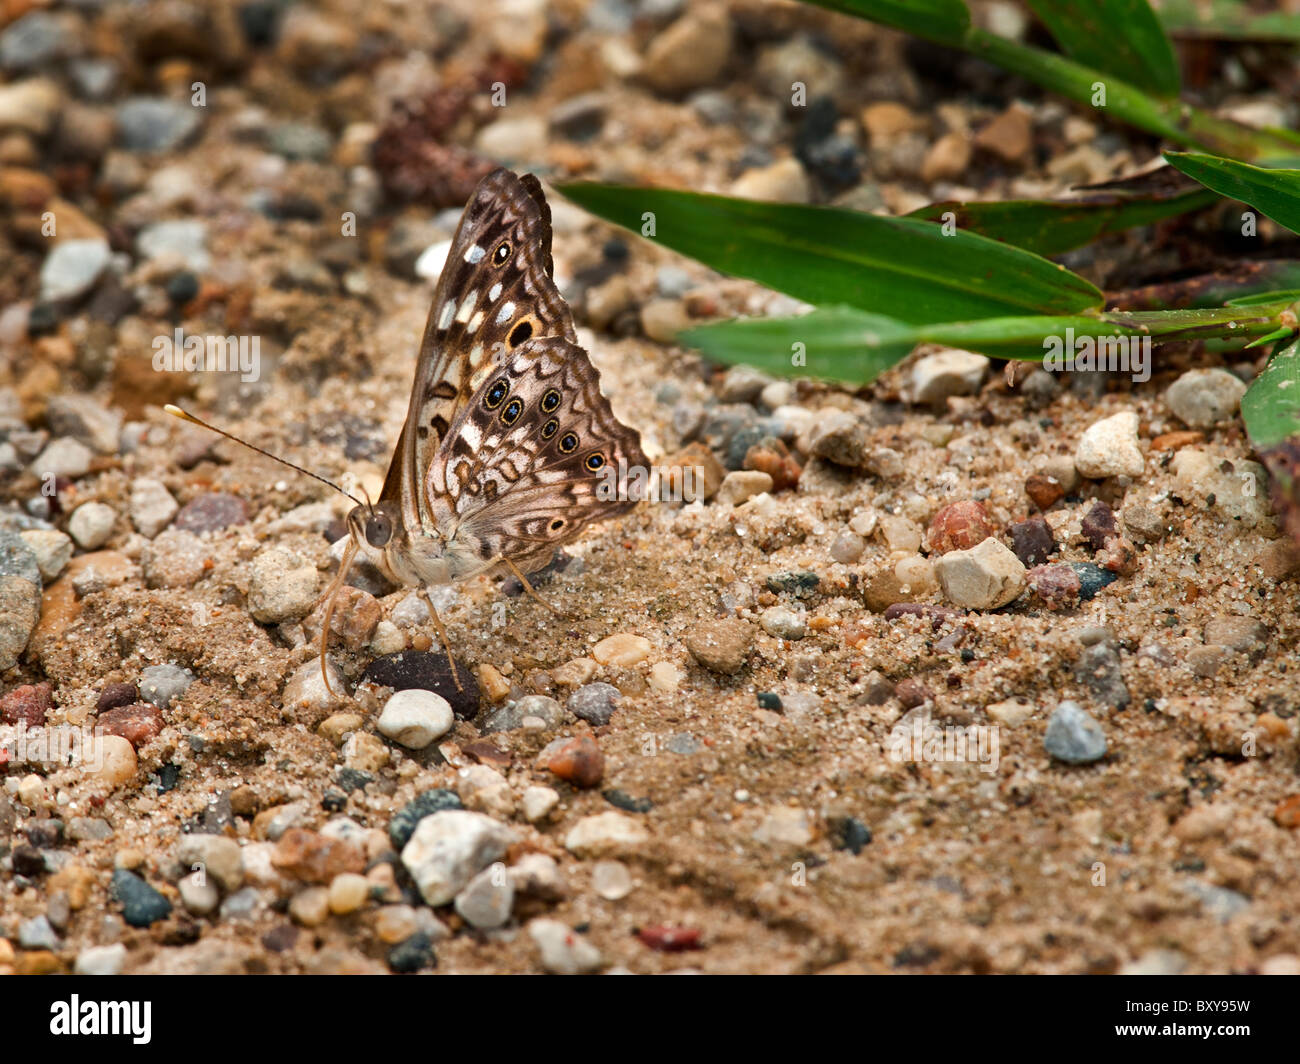 Hackberry butterfly  licking mineral salts on sandy ground Stock Photo